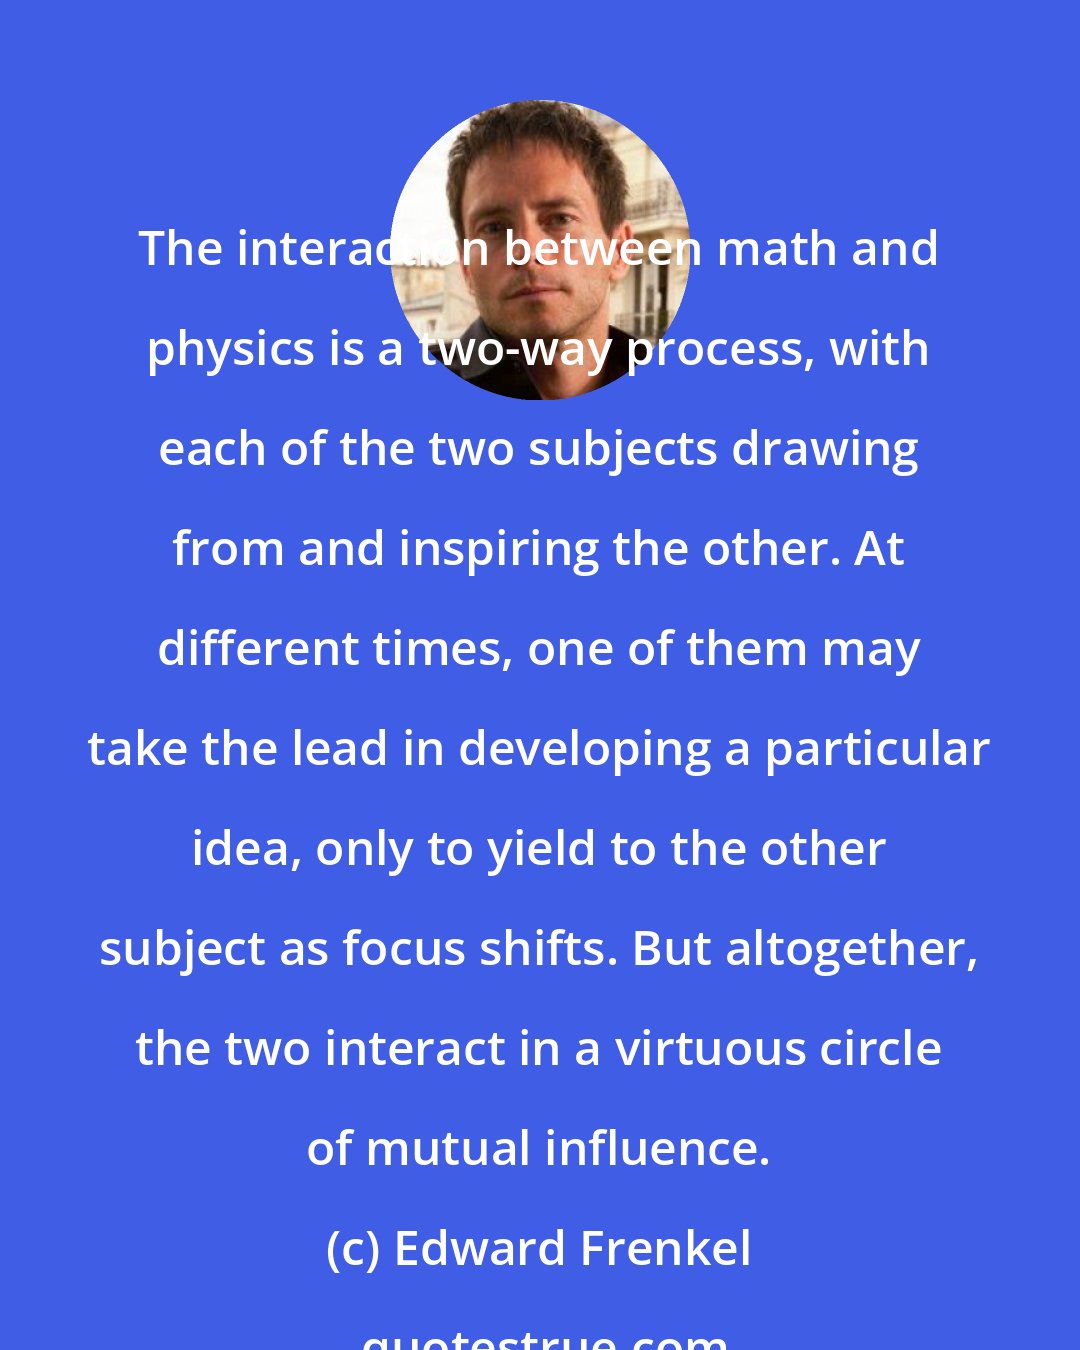 Edward Frenkel: The interaction between math and physics is a two-way process, with each of the two subjects drawing from and inspiring the other. At different times, one of them may take the lead in developing a particular idea, only to yield to the other subject as focus shifts. But altogether, the two interact in a virtuous circle of mutual influence.